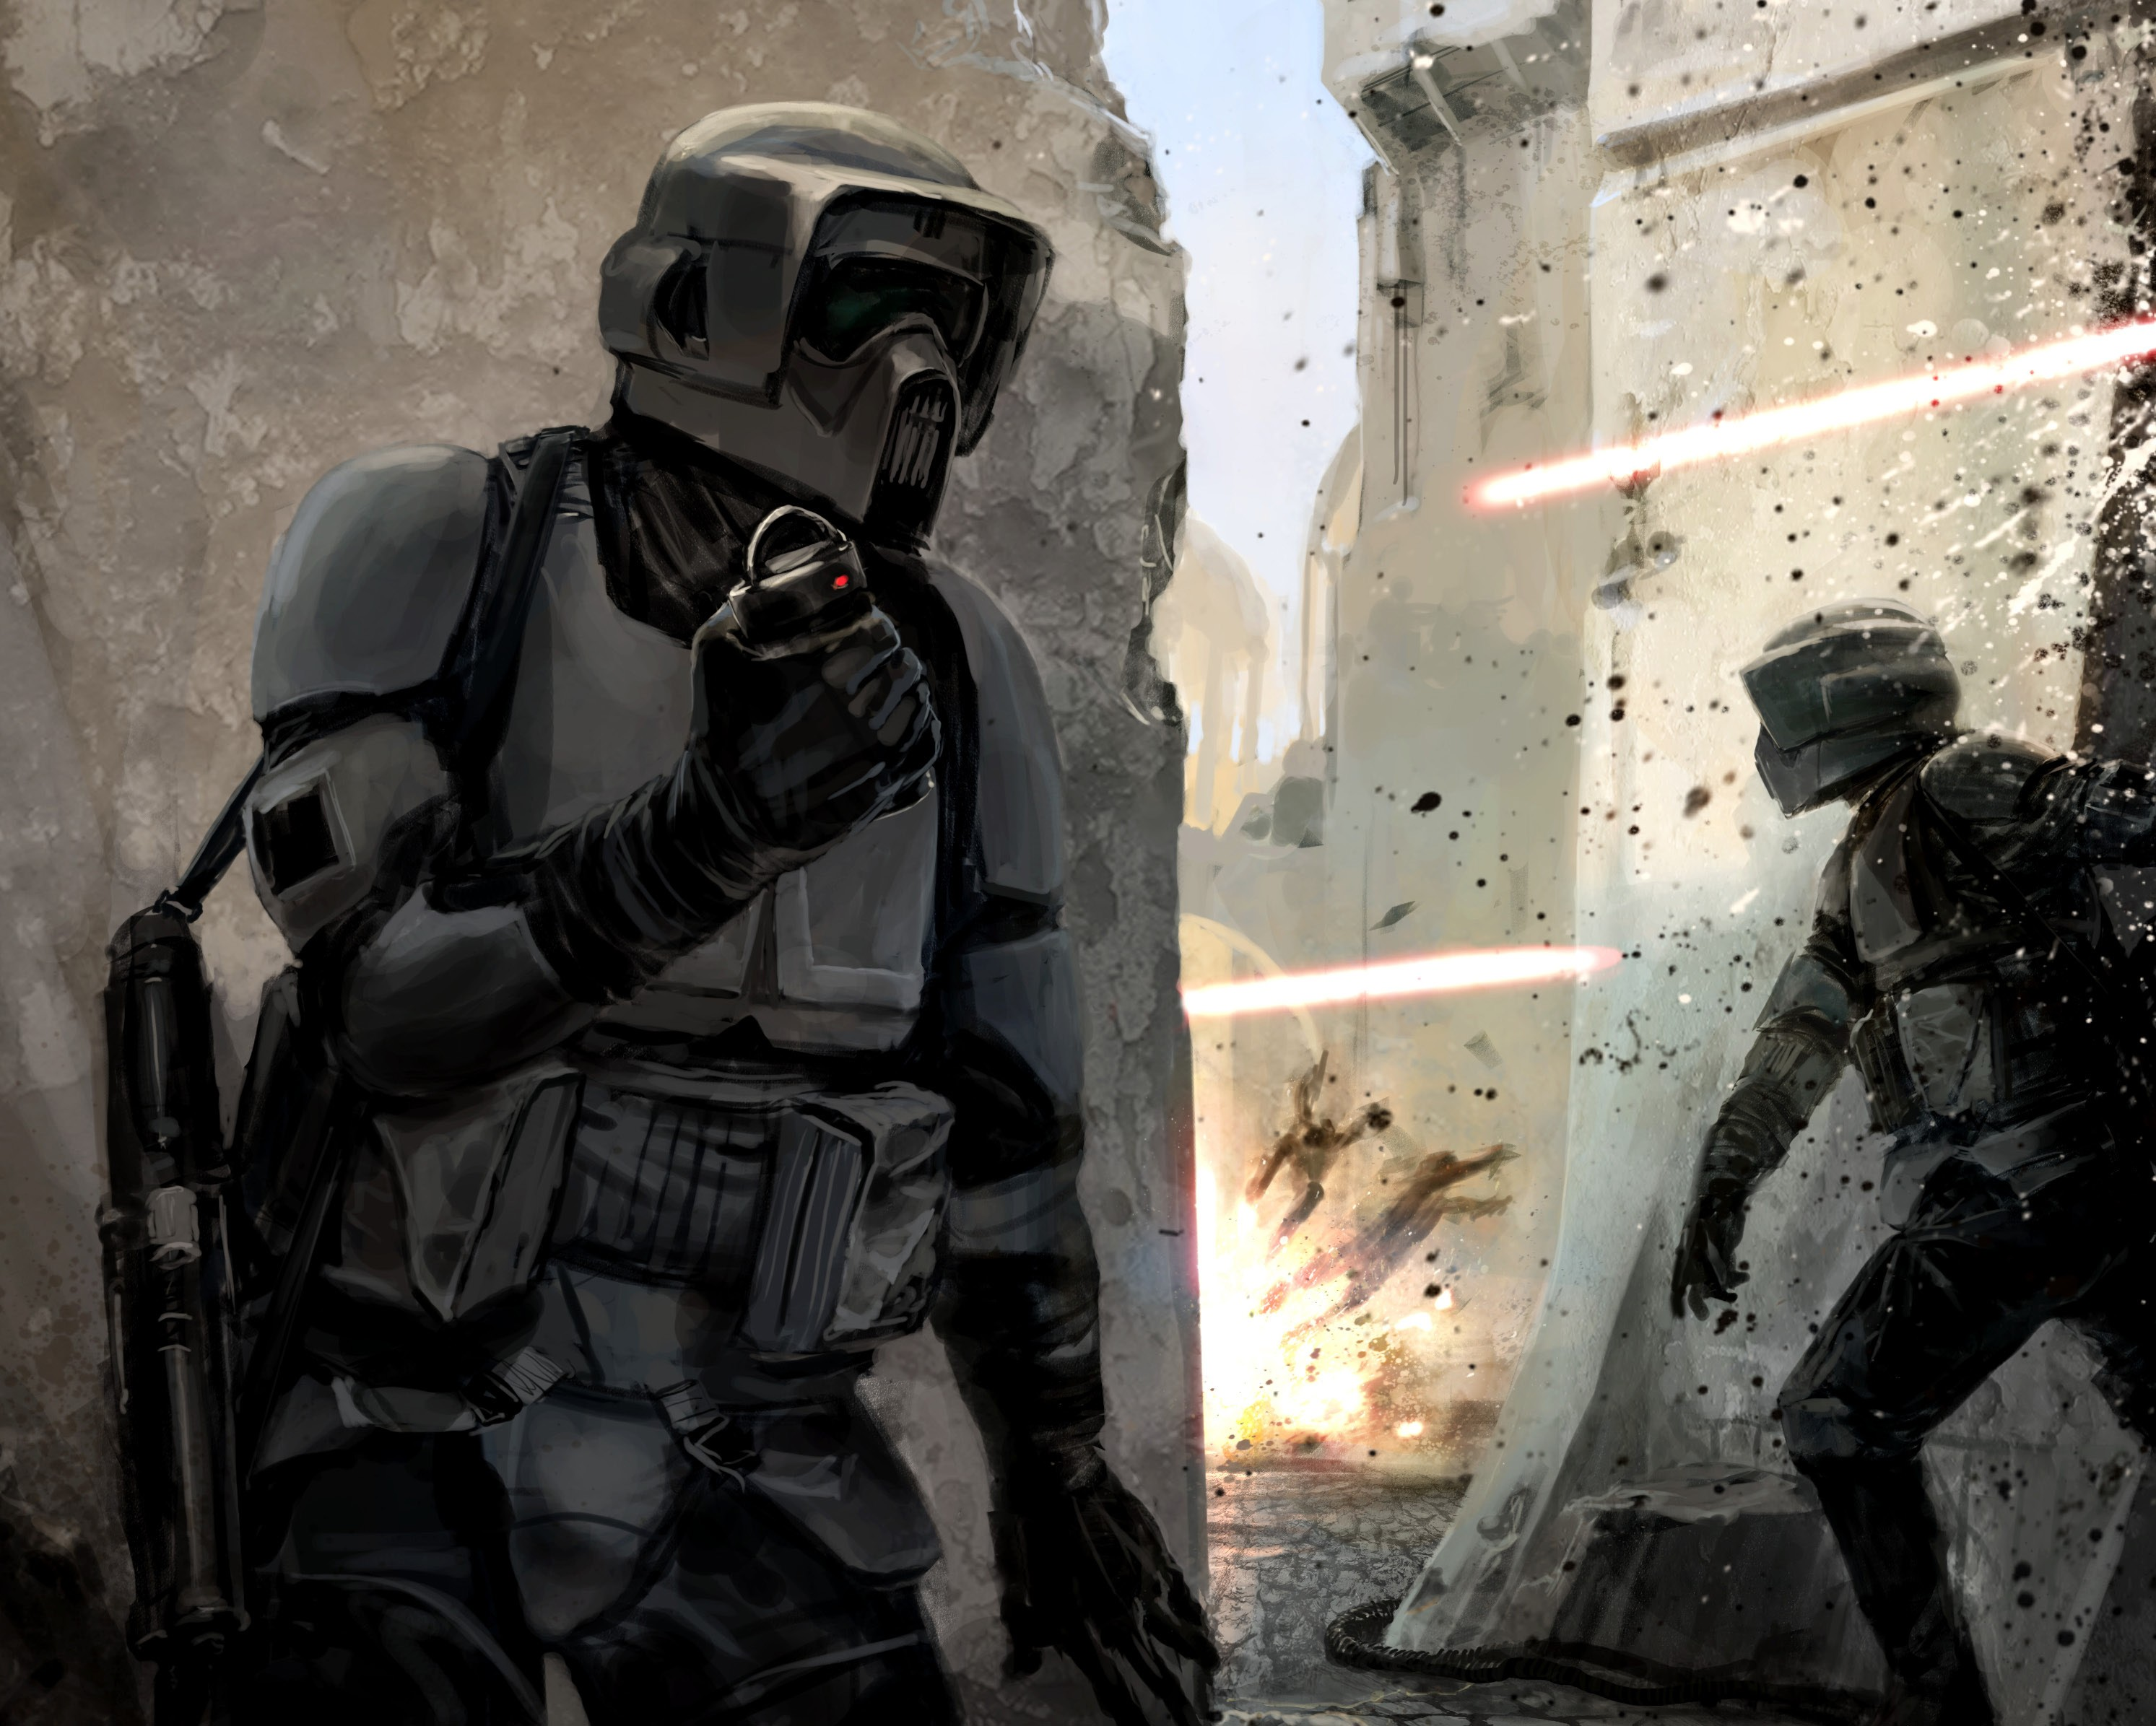 General 2986x2391 Star Wars science fiction artwork explosion battle scout trooper Imperial Forces